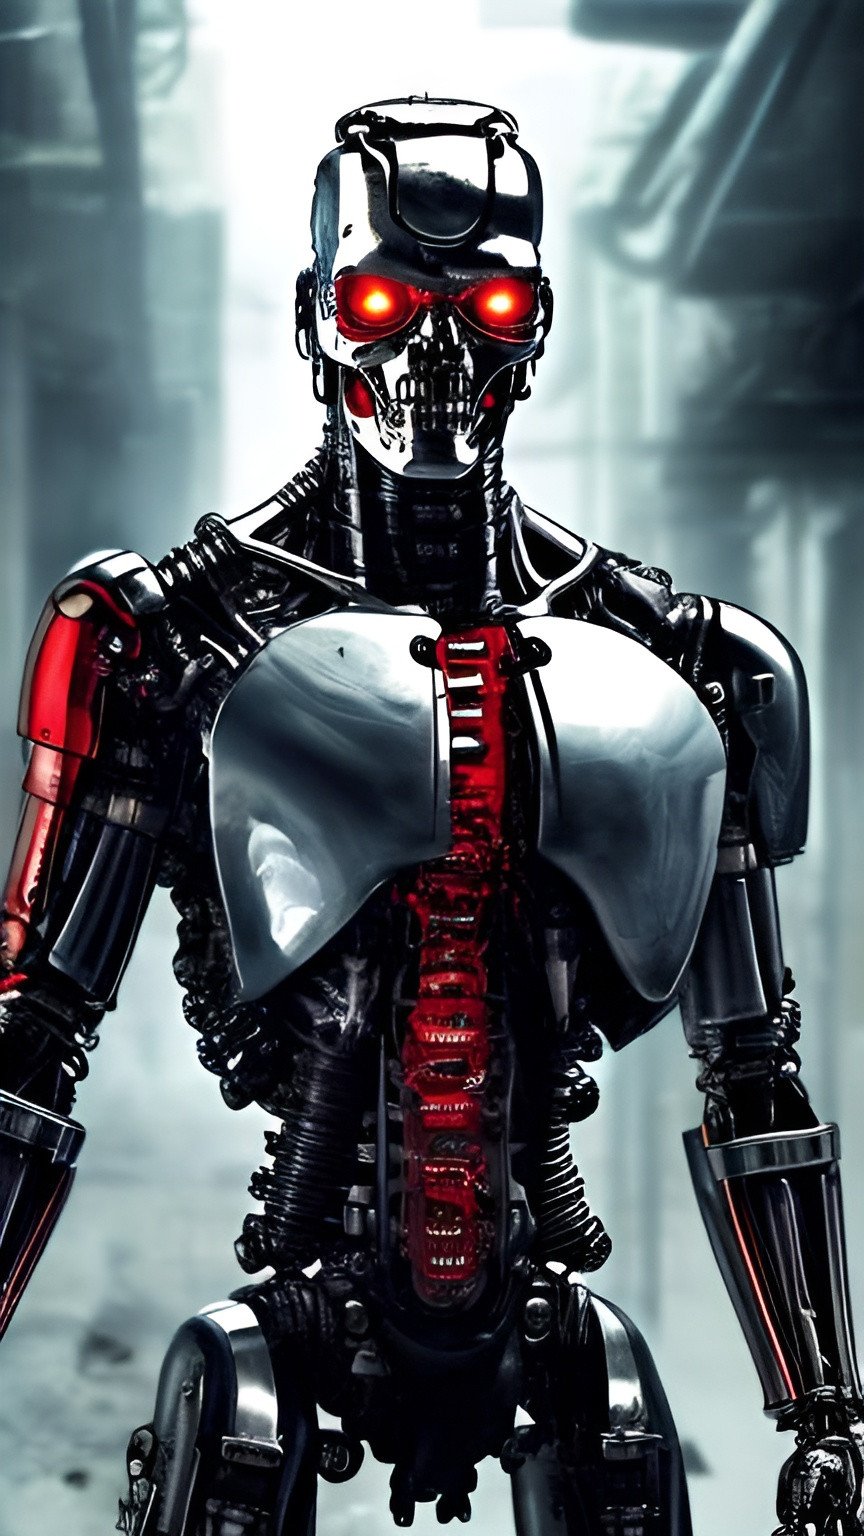 Prompt: terminator-like cyborg with steel exoskeleton upper body, chrome head tilted downward with menacing look, red eyes